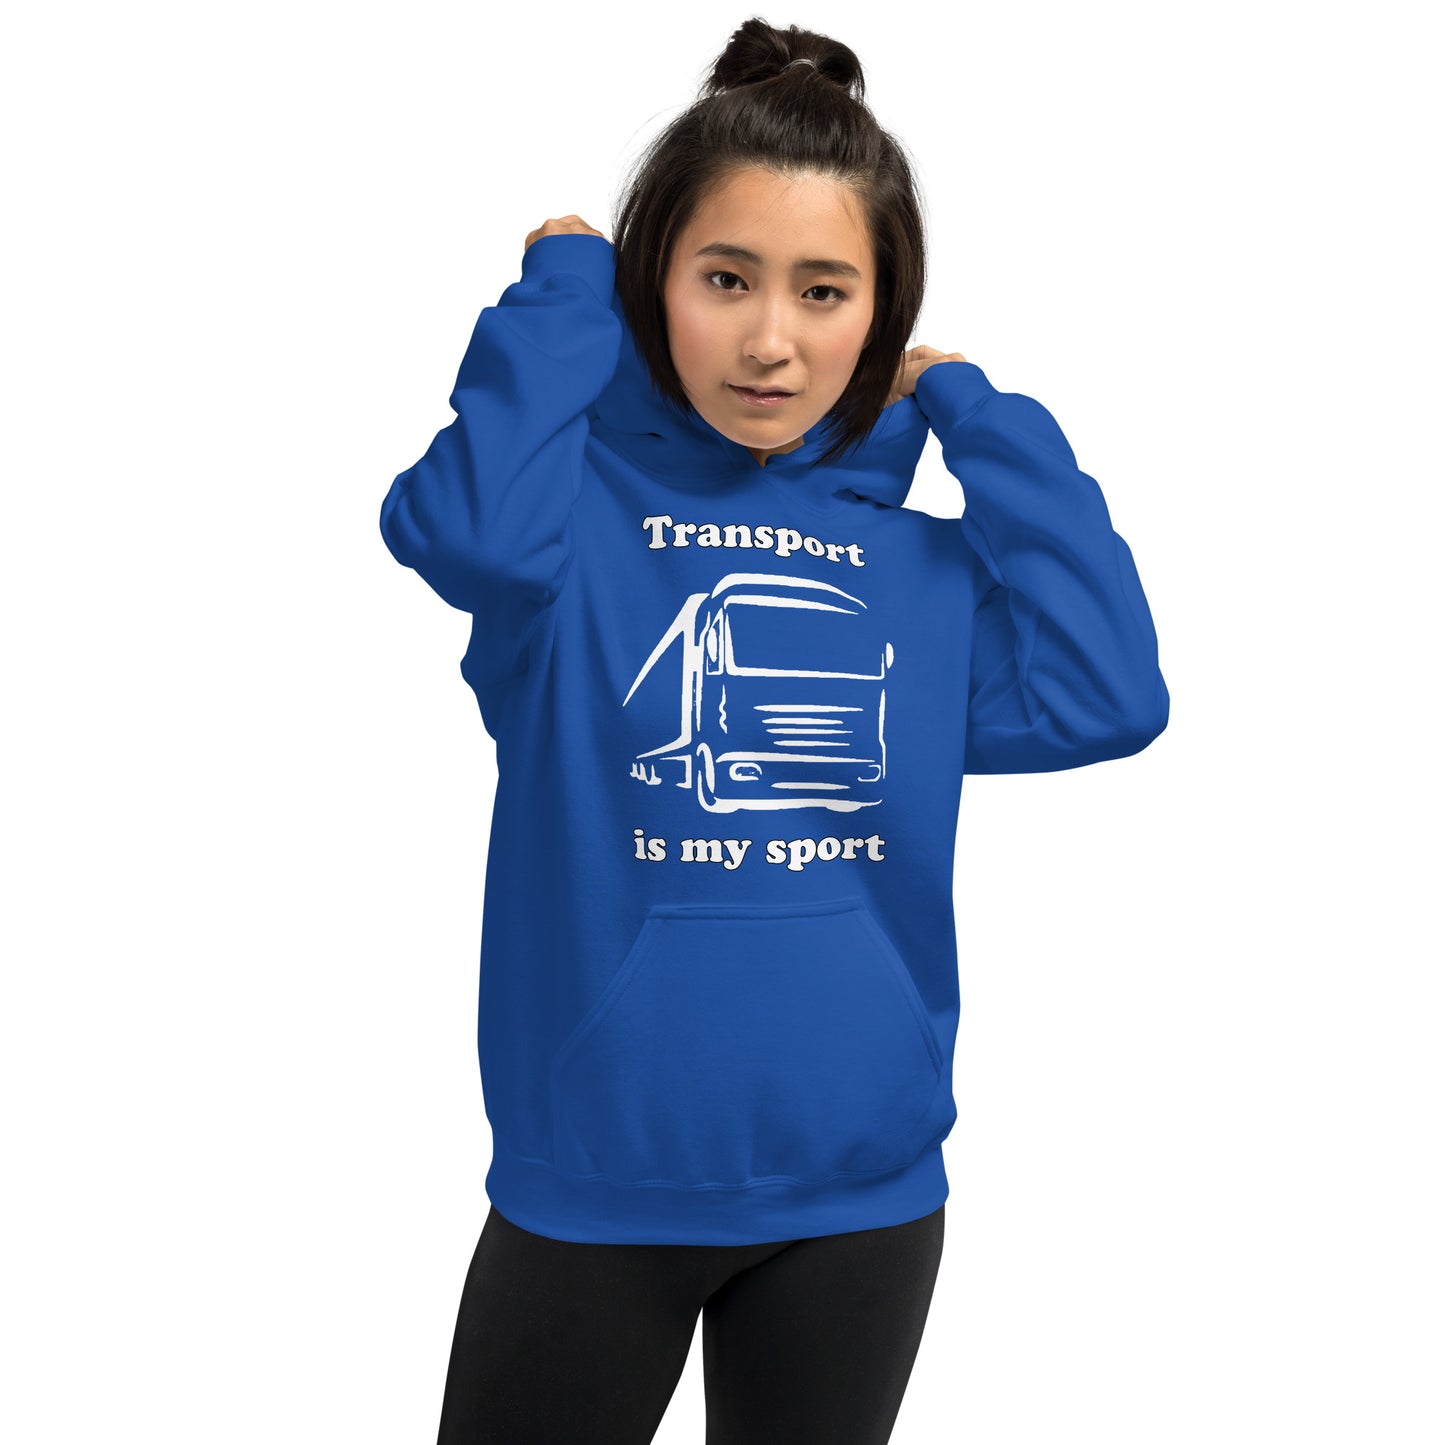 Woman with royal blue hoodie with picture of truck and text "Transport is my sport"